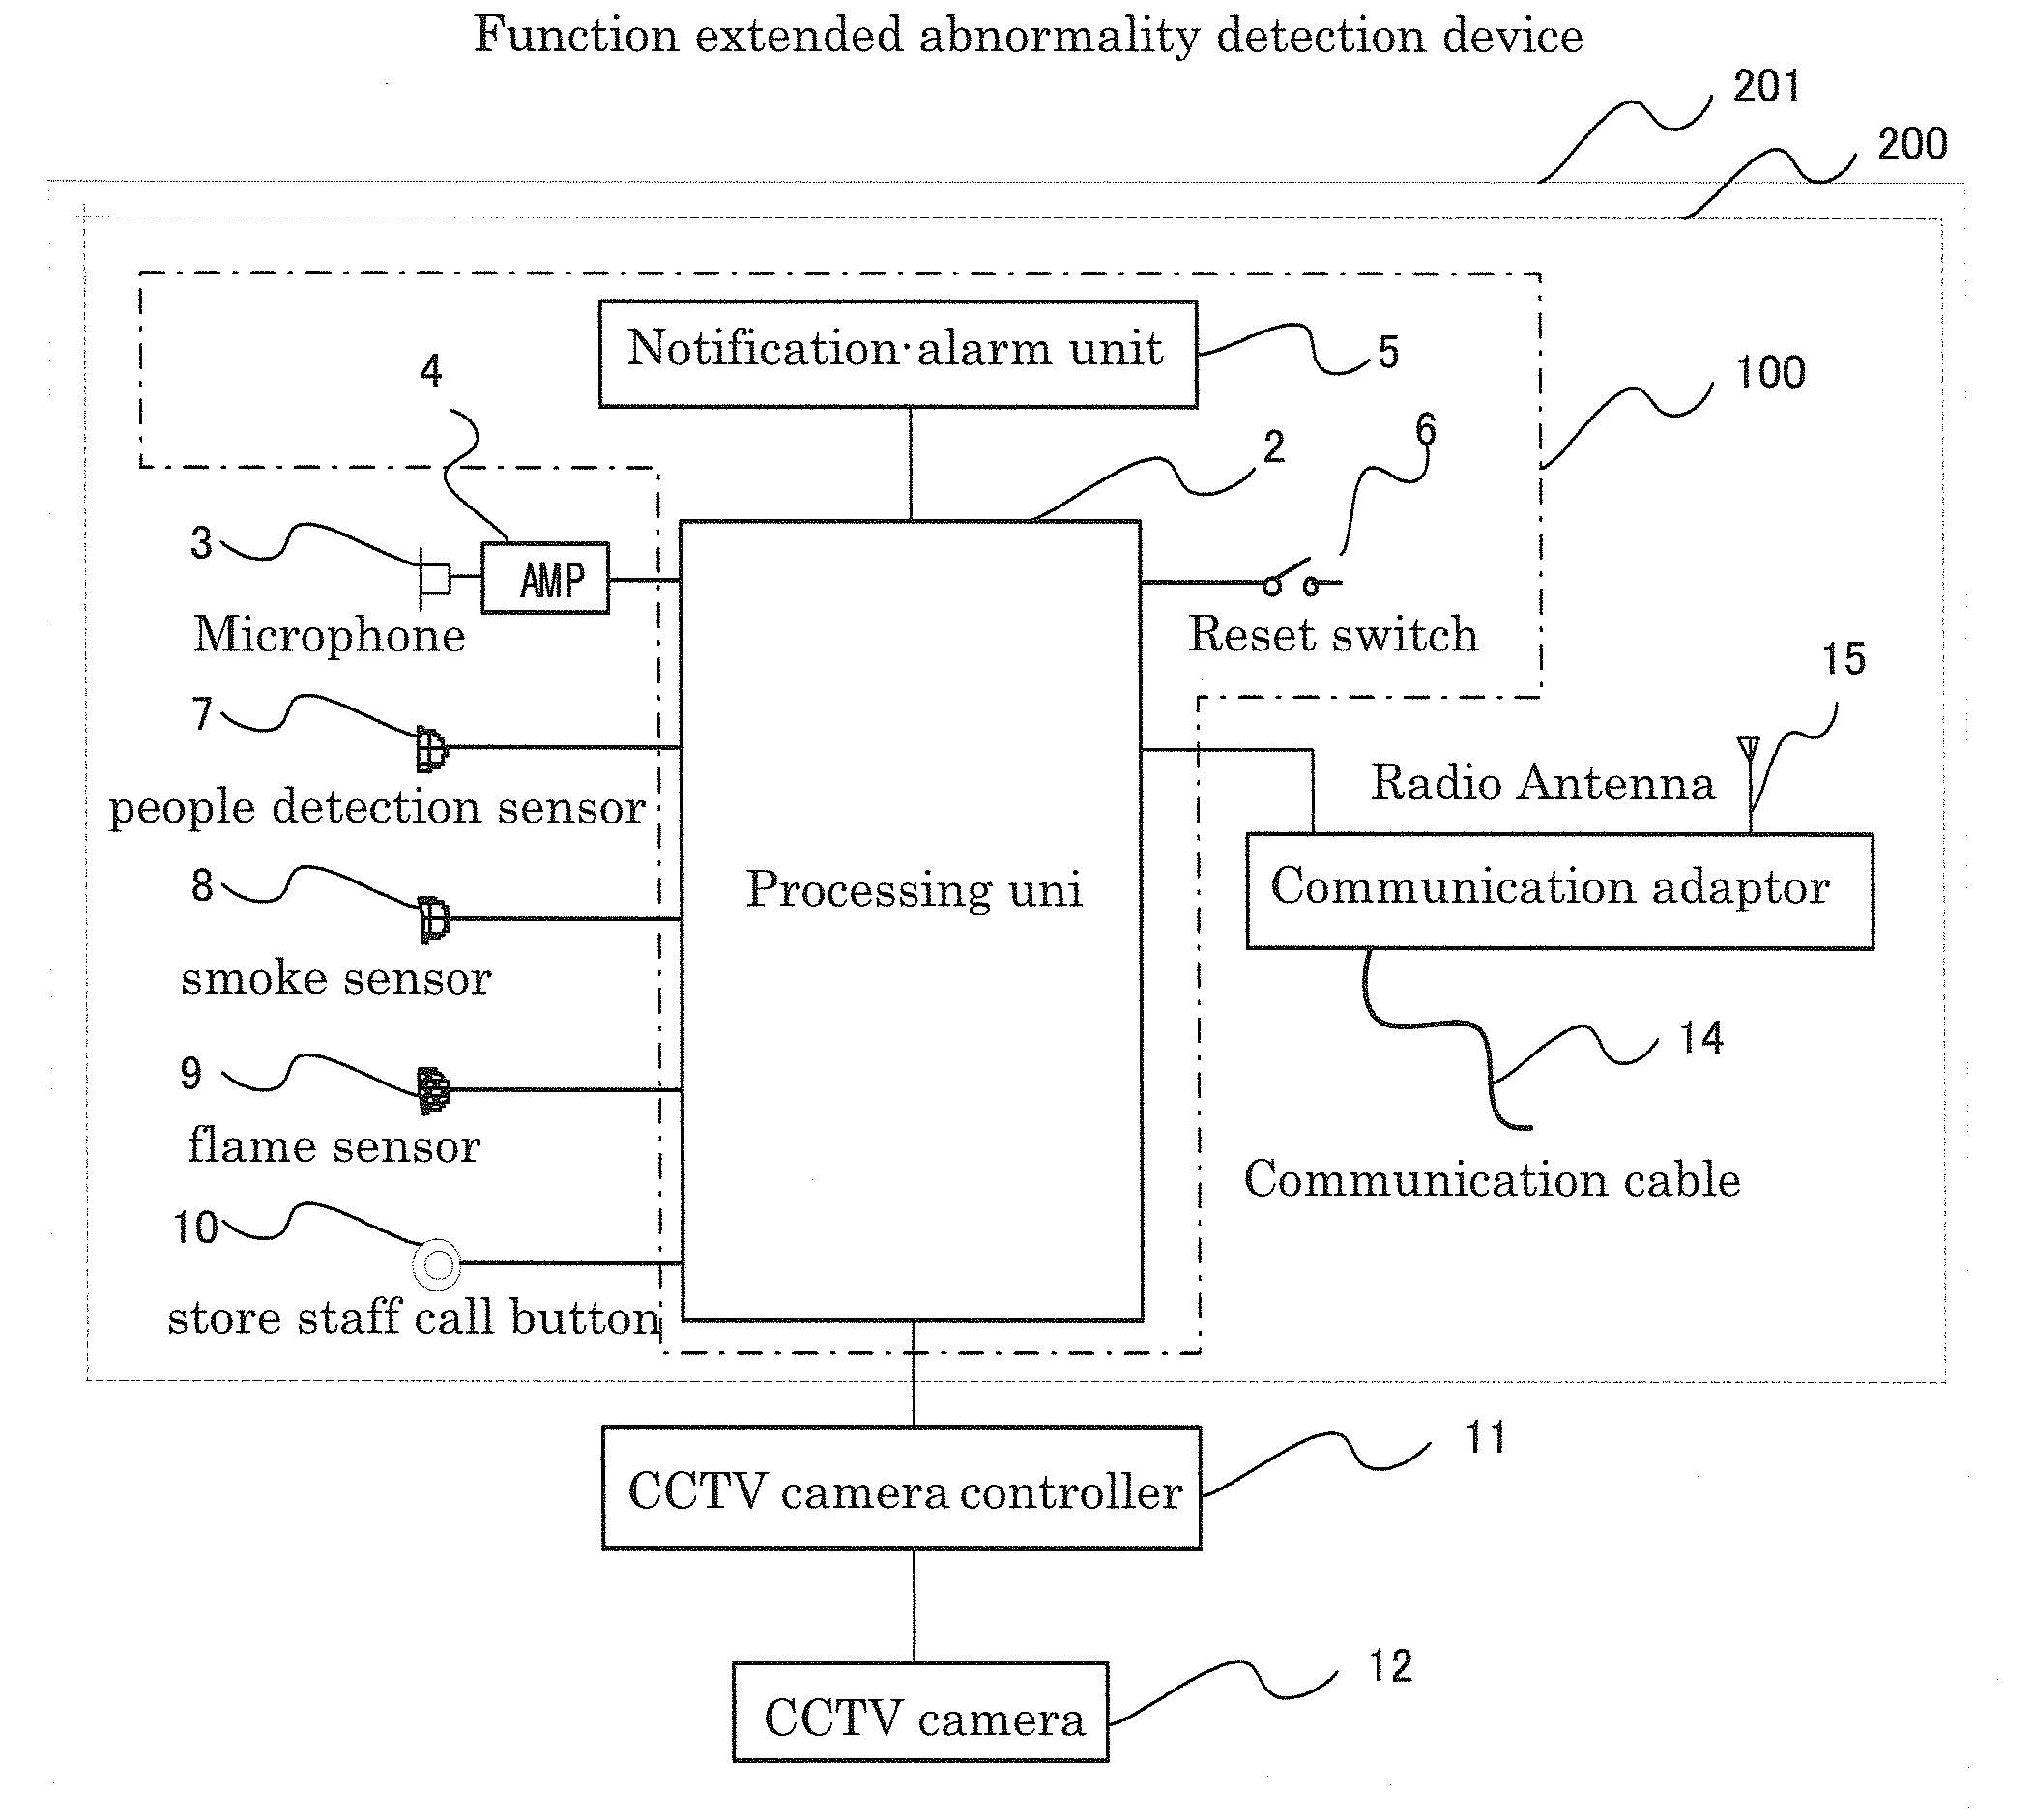 Abnormality detection device and security system